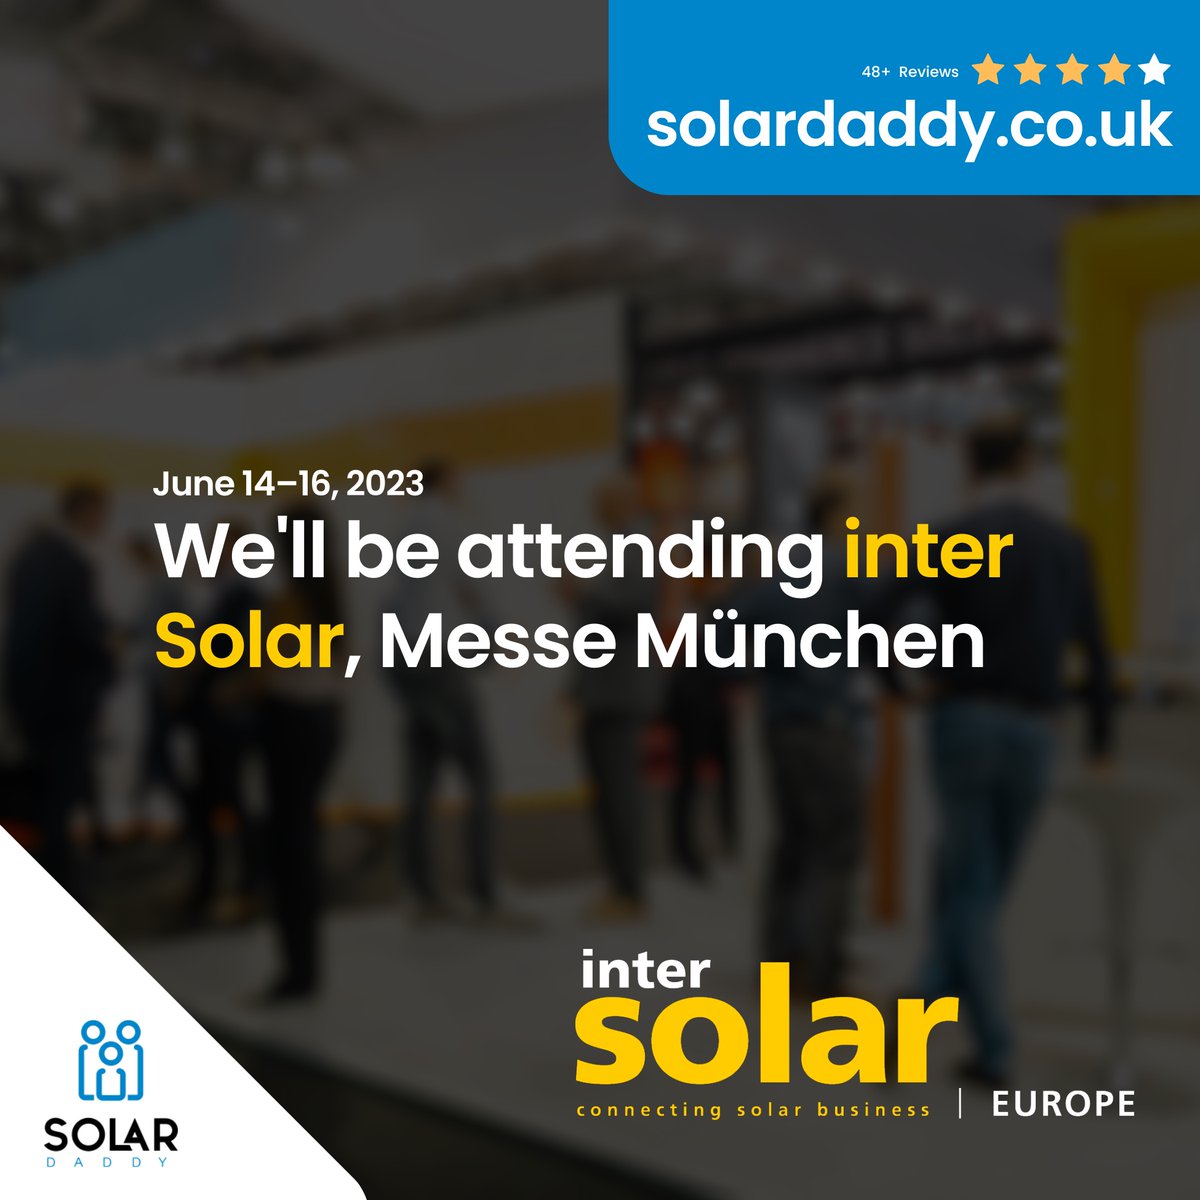 Daniel Westhead is super excited to be attending this years Intersolar Europe i

#renewableenergy #renewableenergyisthefuture #renewableenergysources #renewableenergynow